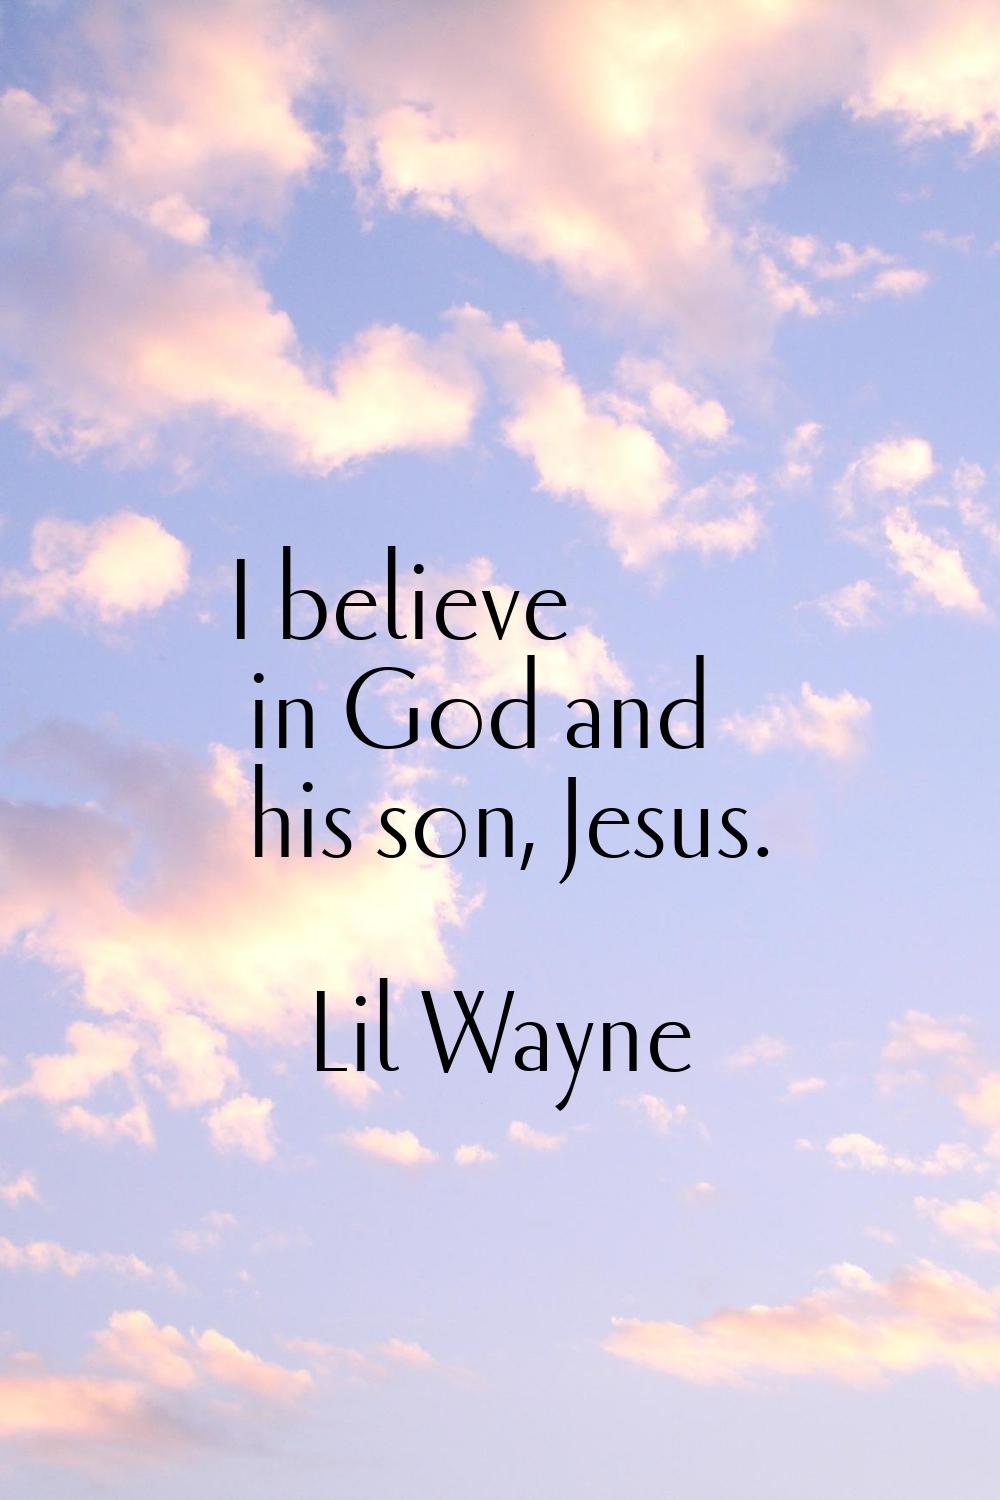 I believe in God and his son, Jesus.